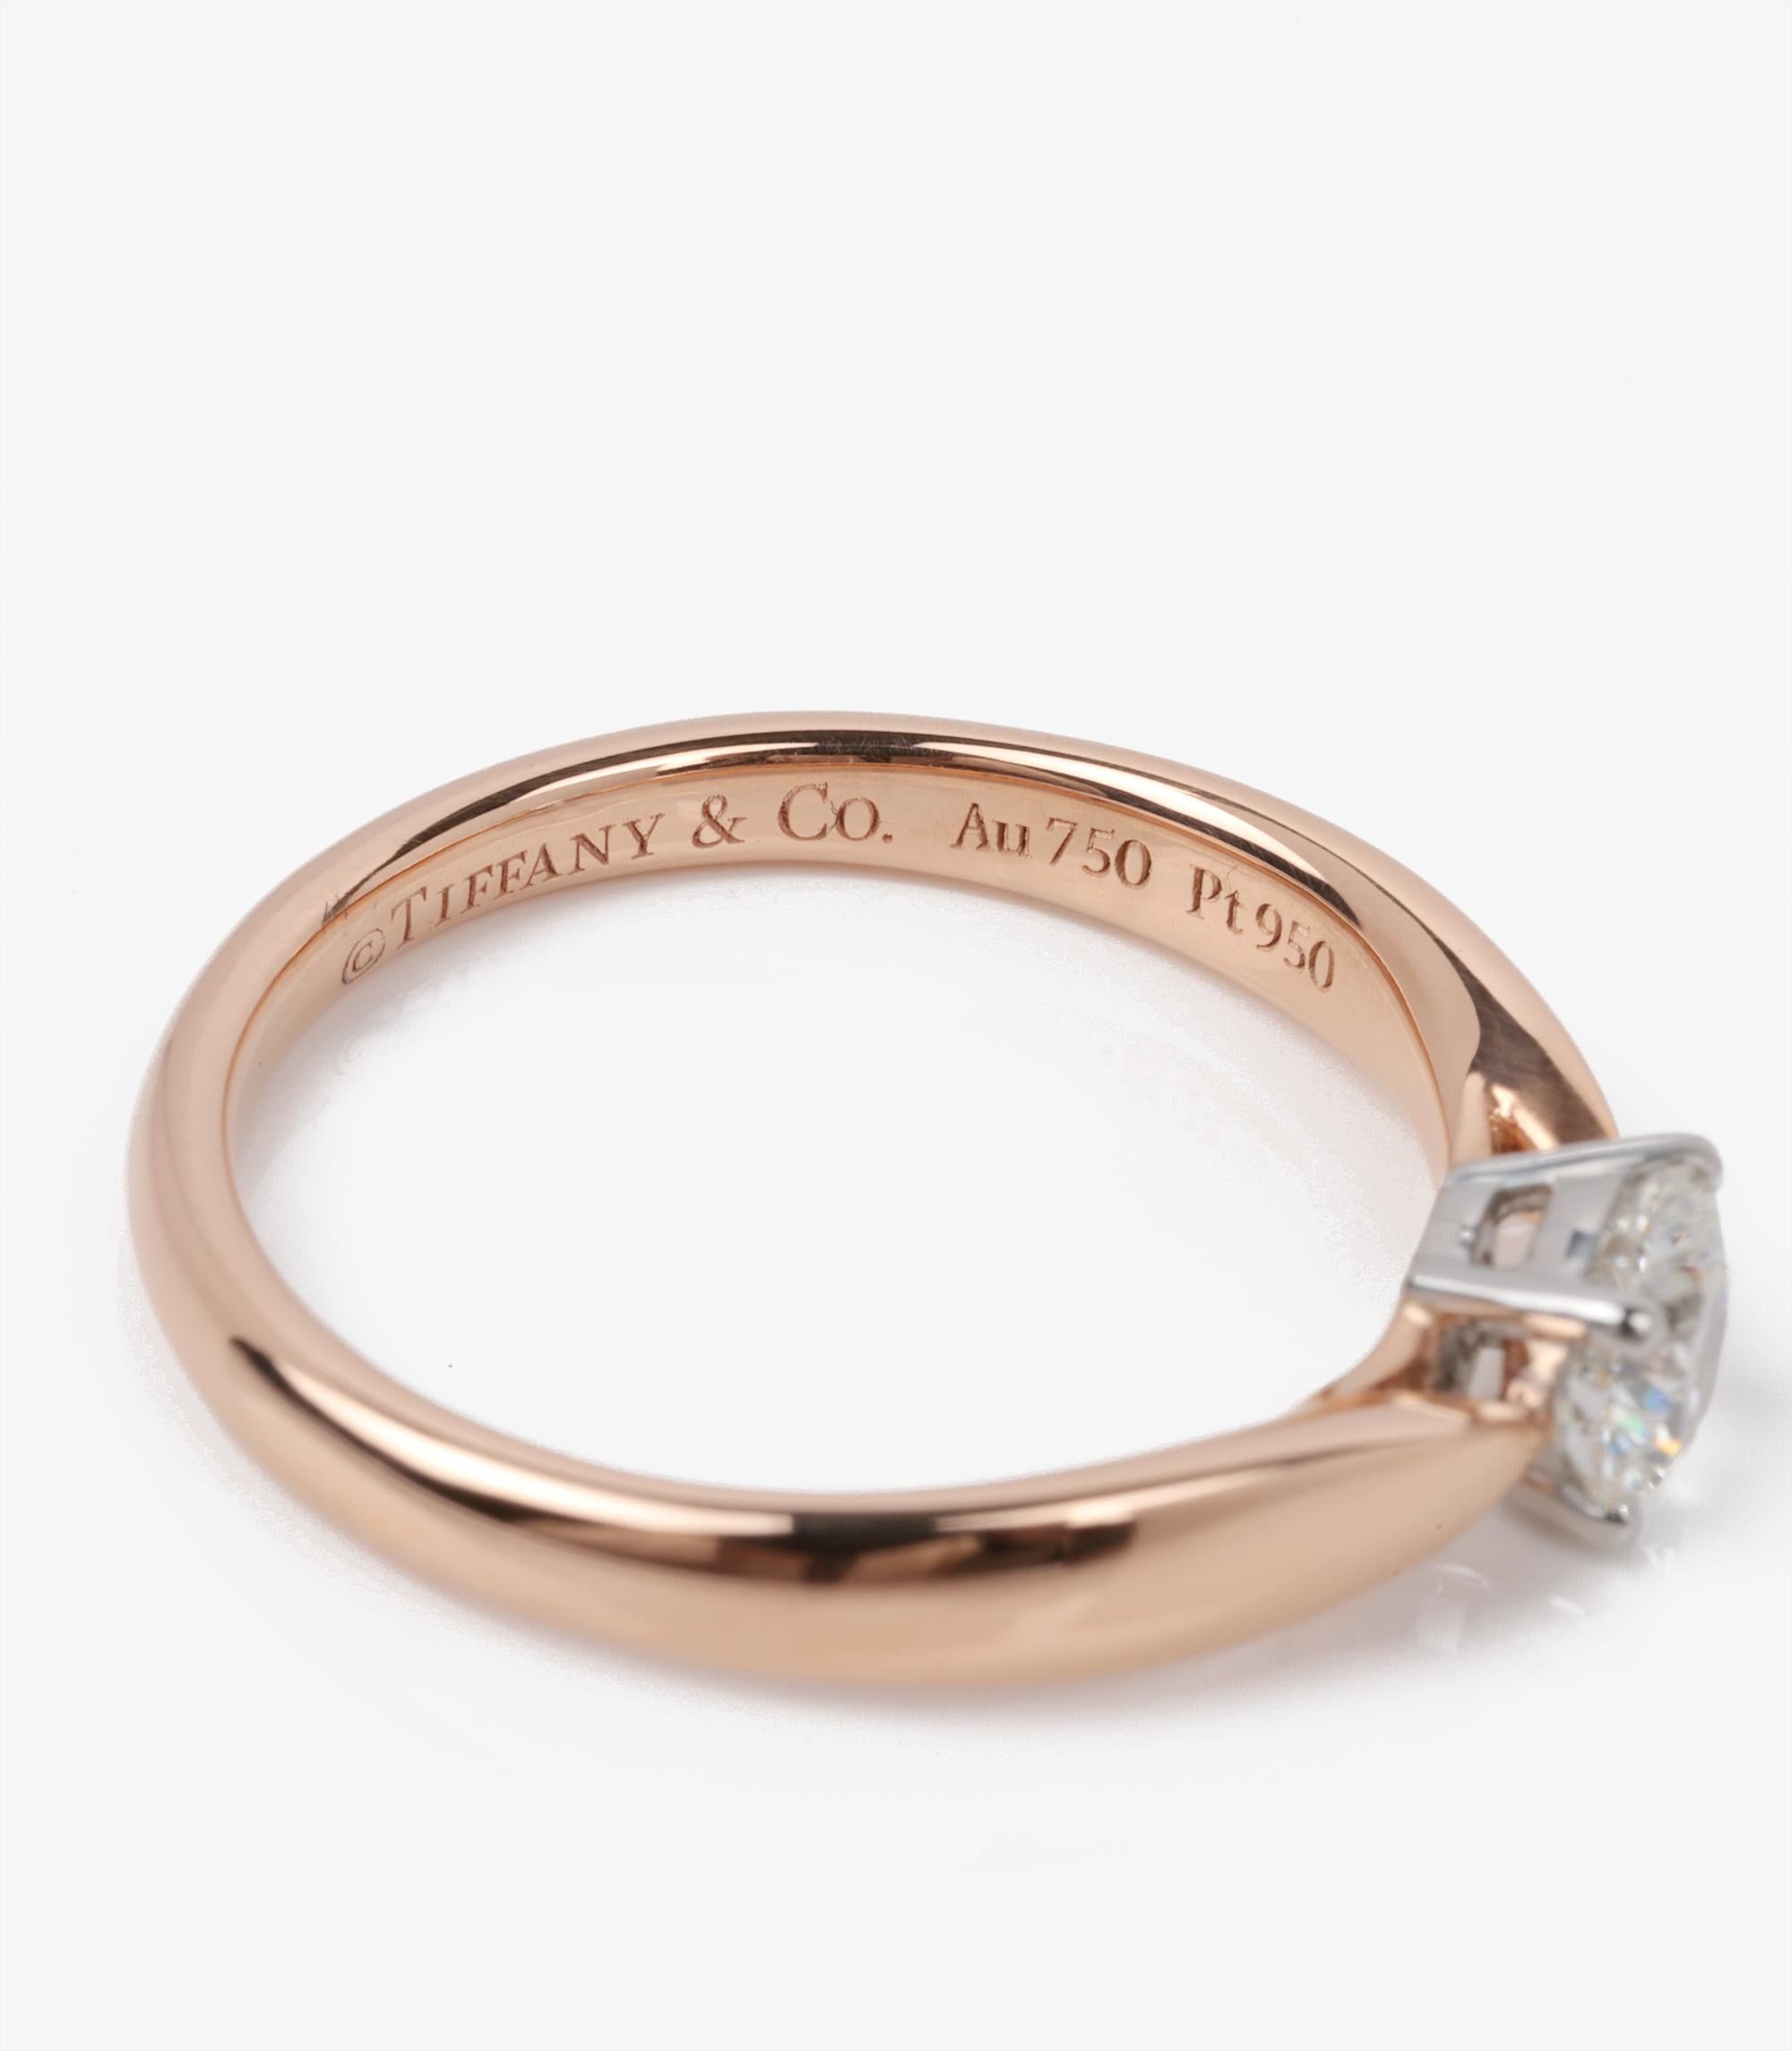 Tiffany & Co. 0.35ct Diamond 18ct Rose Gold Harmony Ring In Excellent Condition For Sale In Bishop's Stortford, Hertfordshire